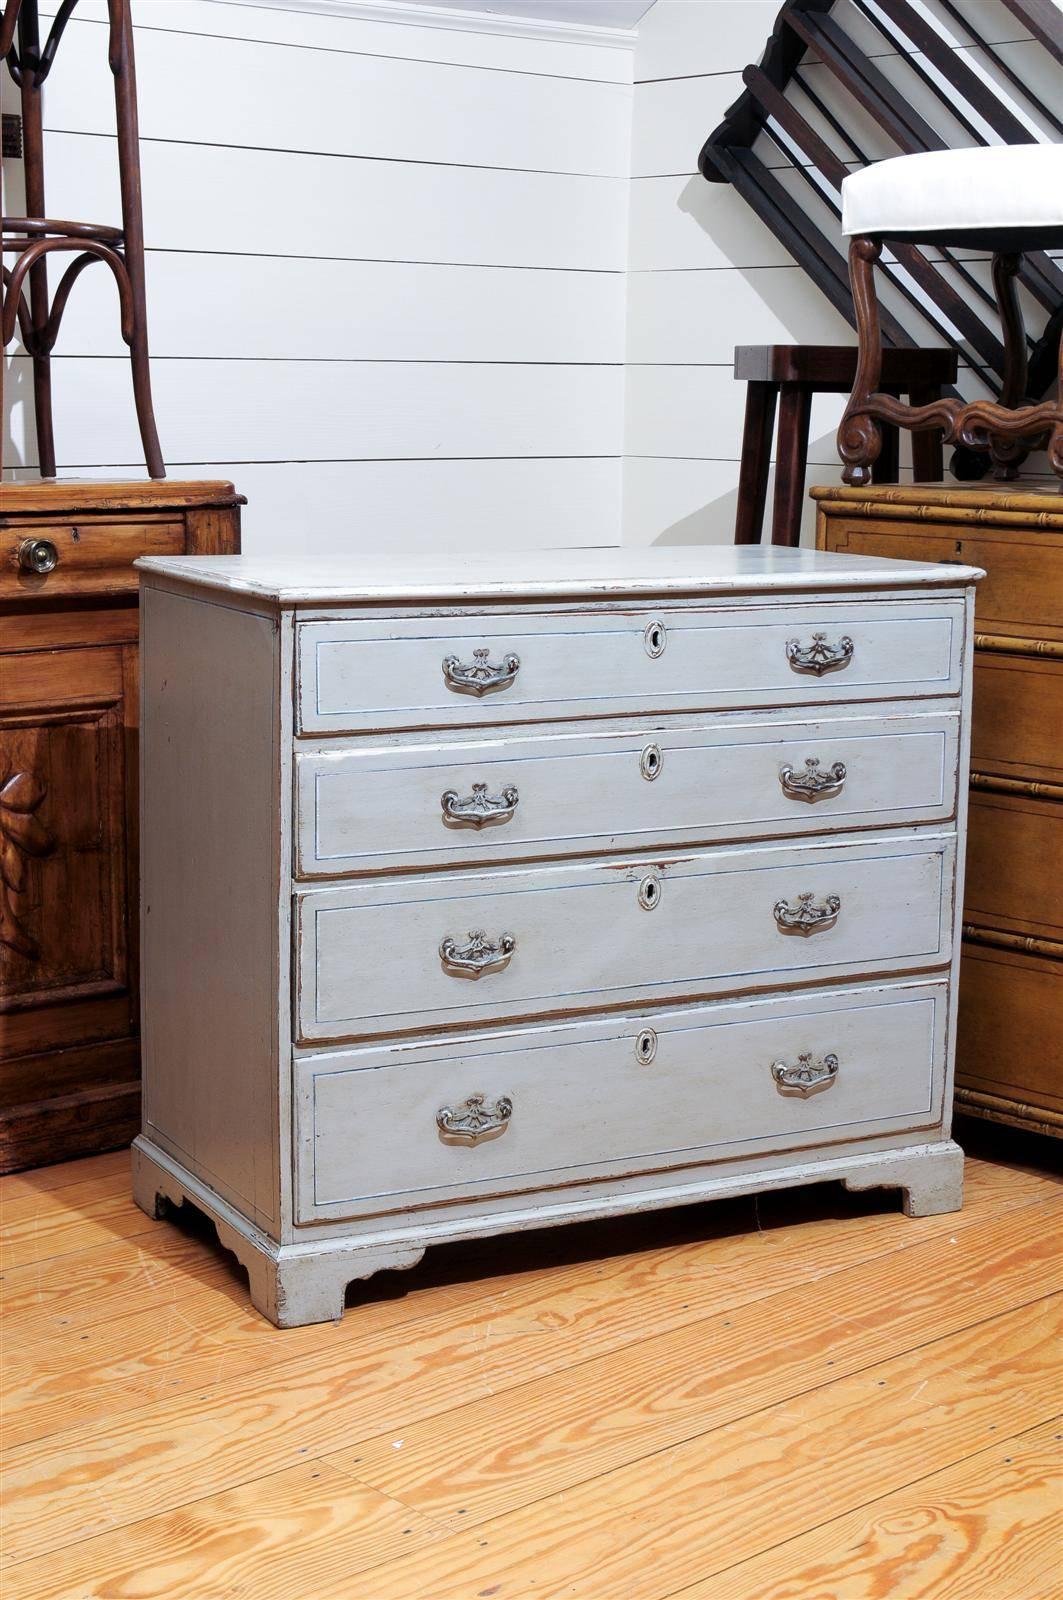 An English painted wood four-drawer chest from the 19th century. This English chest from circa 1870 features four graded and dovetailed drawers adorned with bail handles and central escutcheons. This English chest is raised on four bracket feet. The